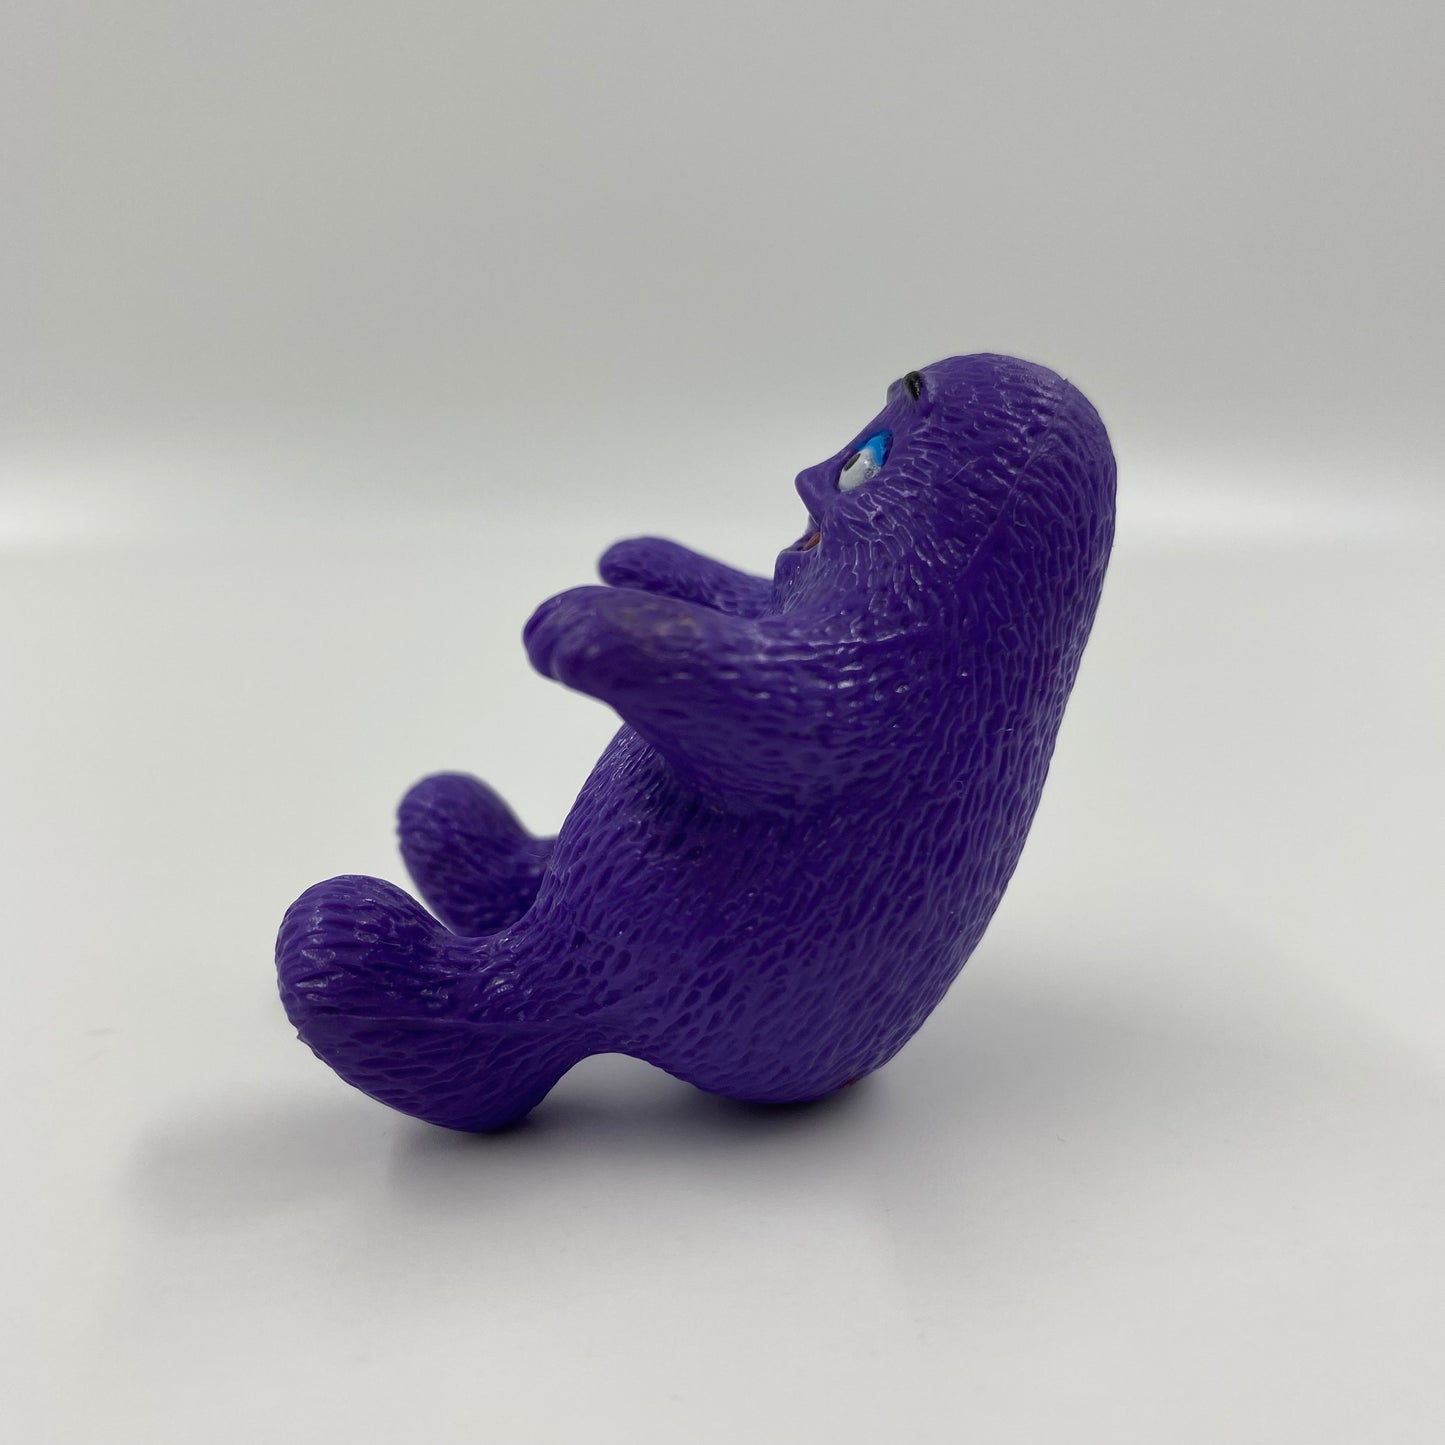 McDonaldland Connectibles Grimace in a Wagon McDonald's Happy Meal toy (1991) figure only